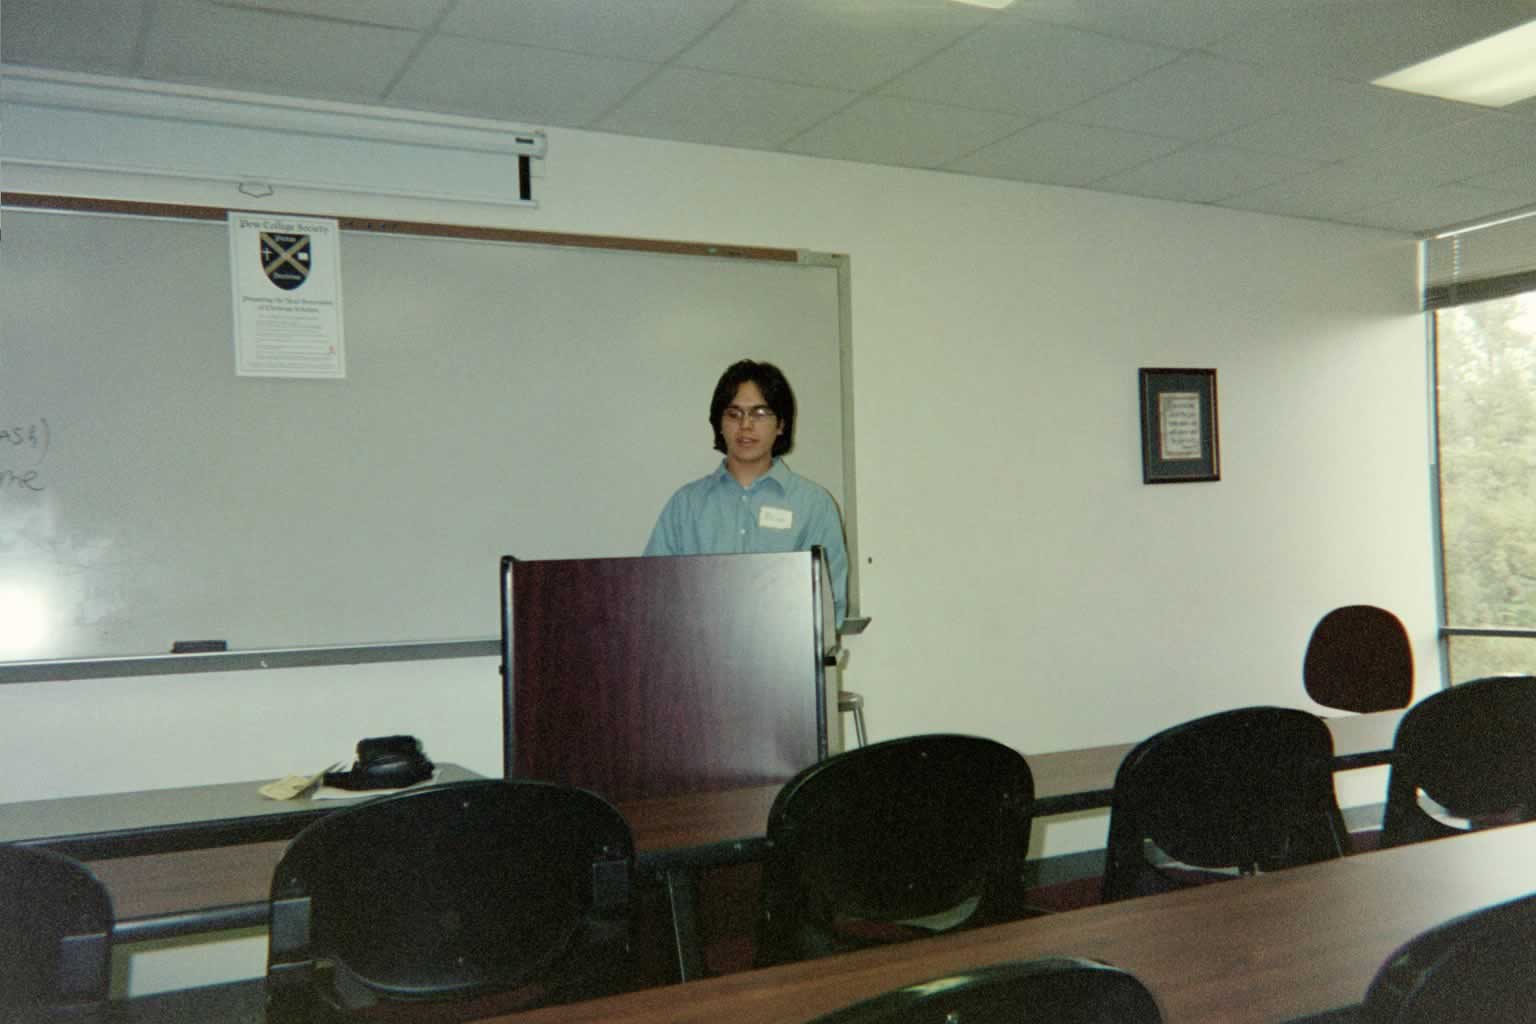 picture of a man in glasses standing behind a podium speaking